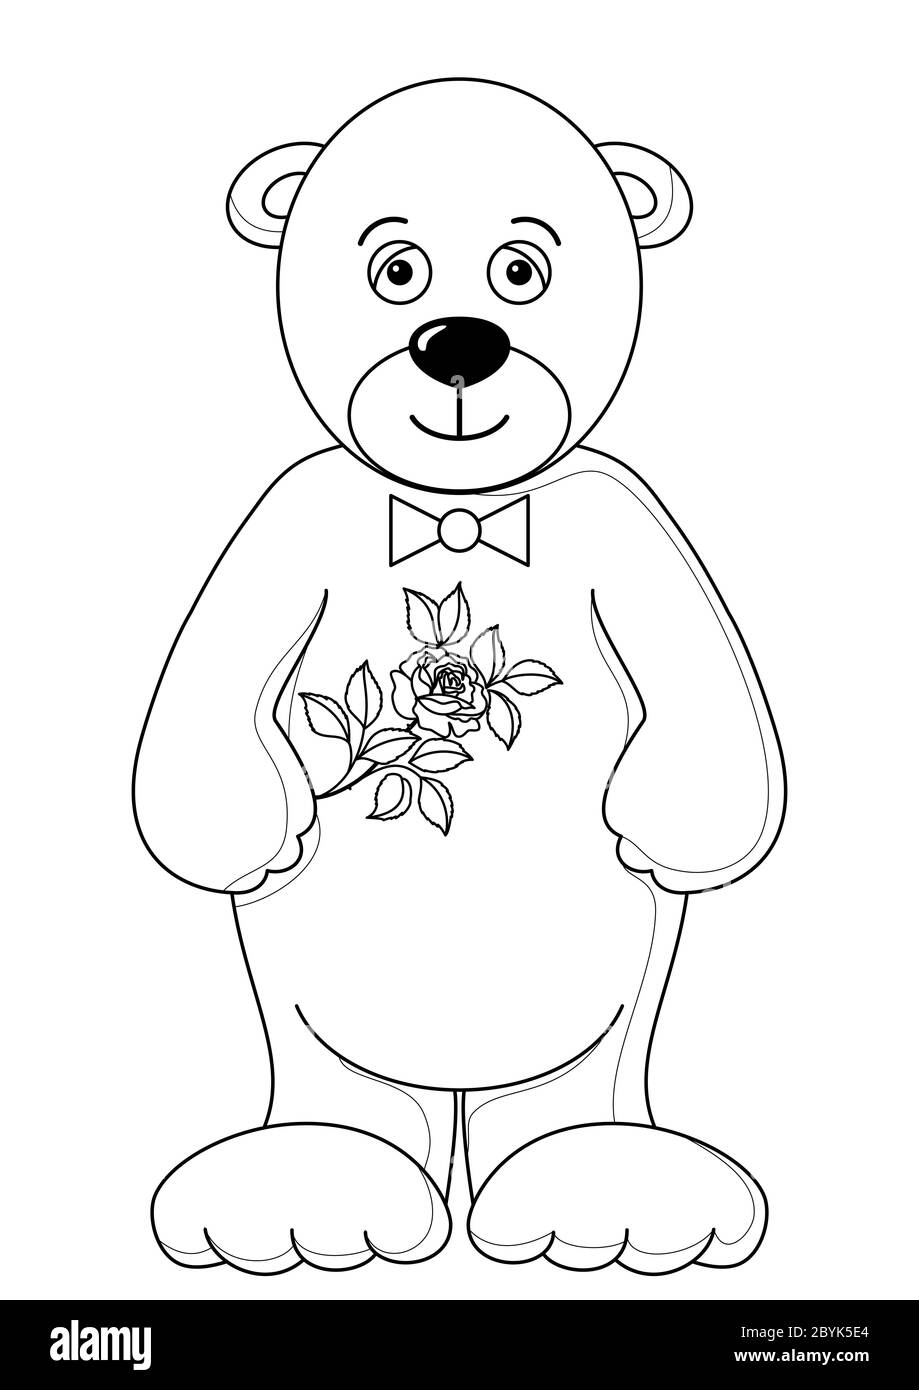 Teddy bear with flower, contours Stock Photo